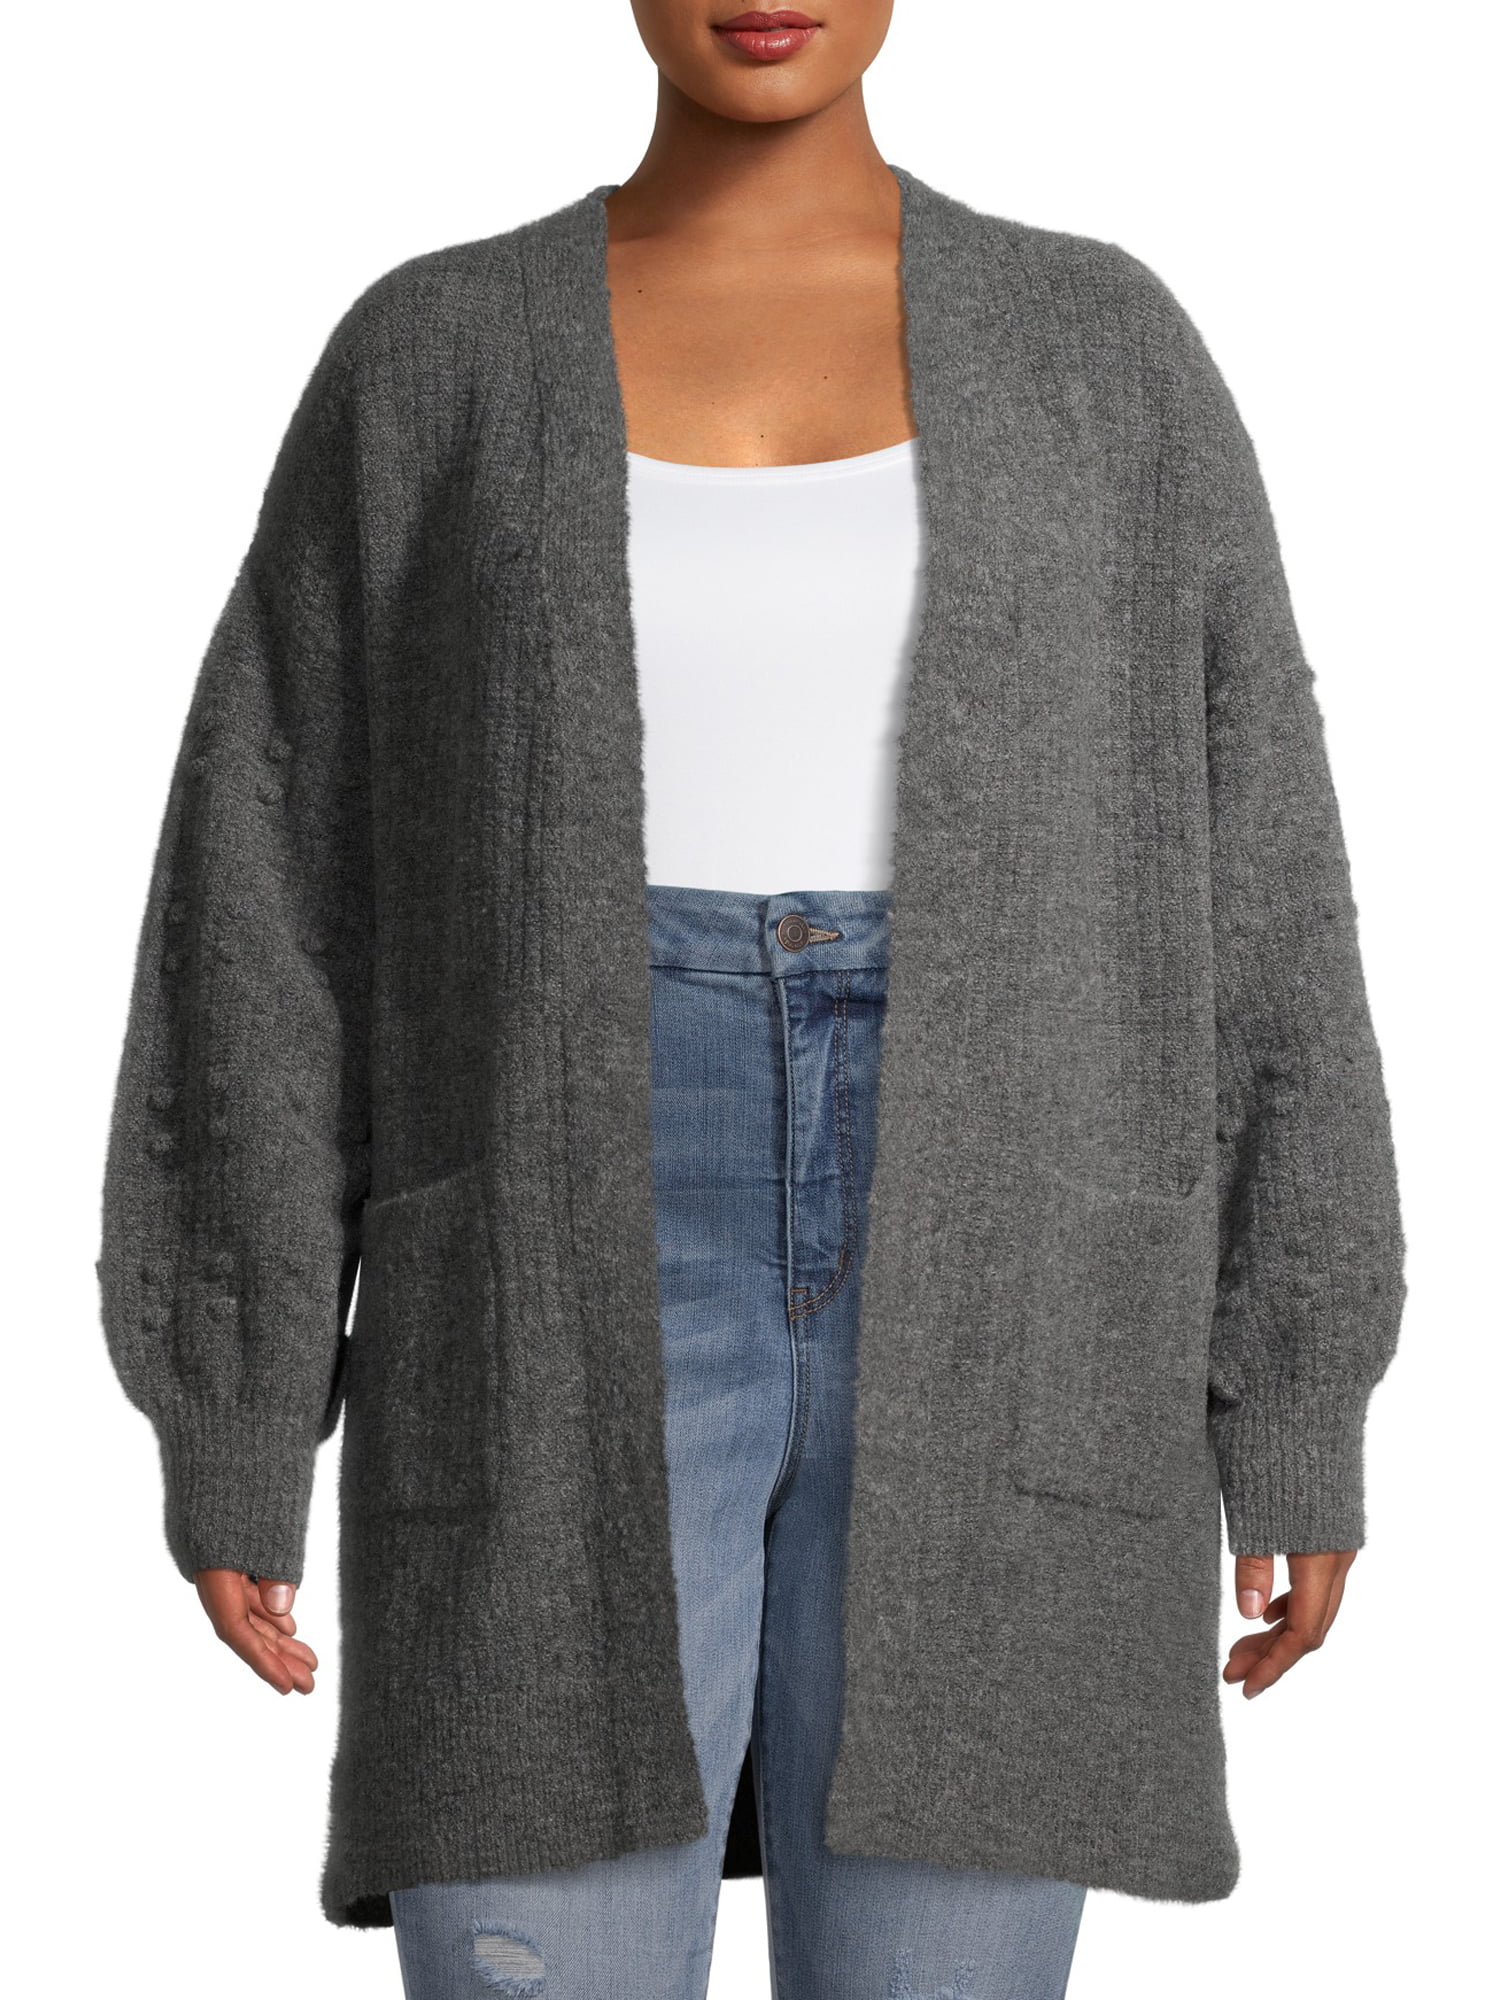 Terra & Sky Super Soft Size Duster Sleeves Stitch Cardigan Popcorn Women\'s with Plus Open-Front